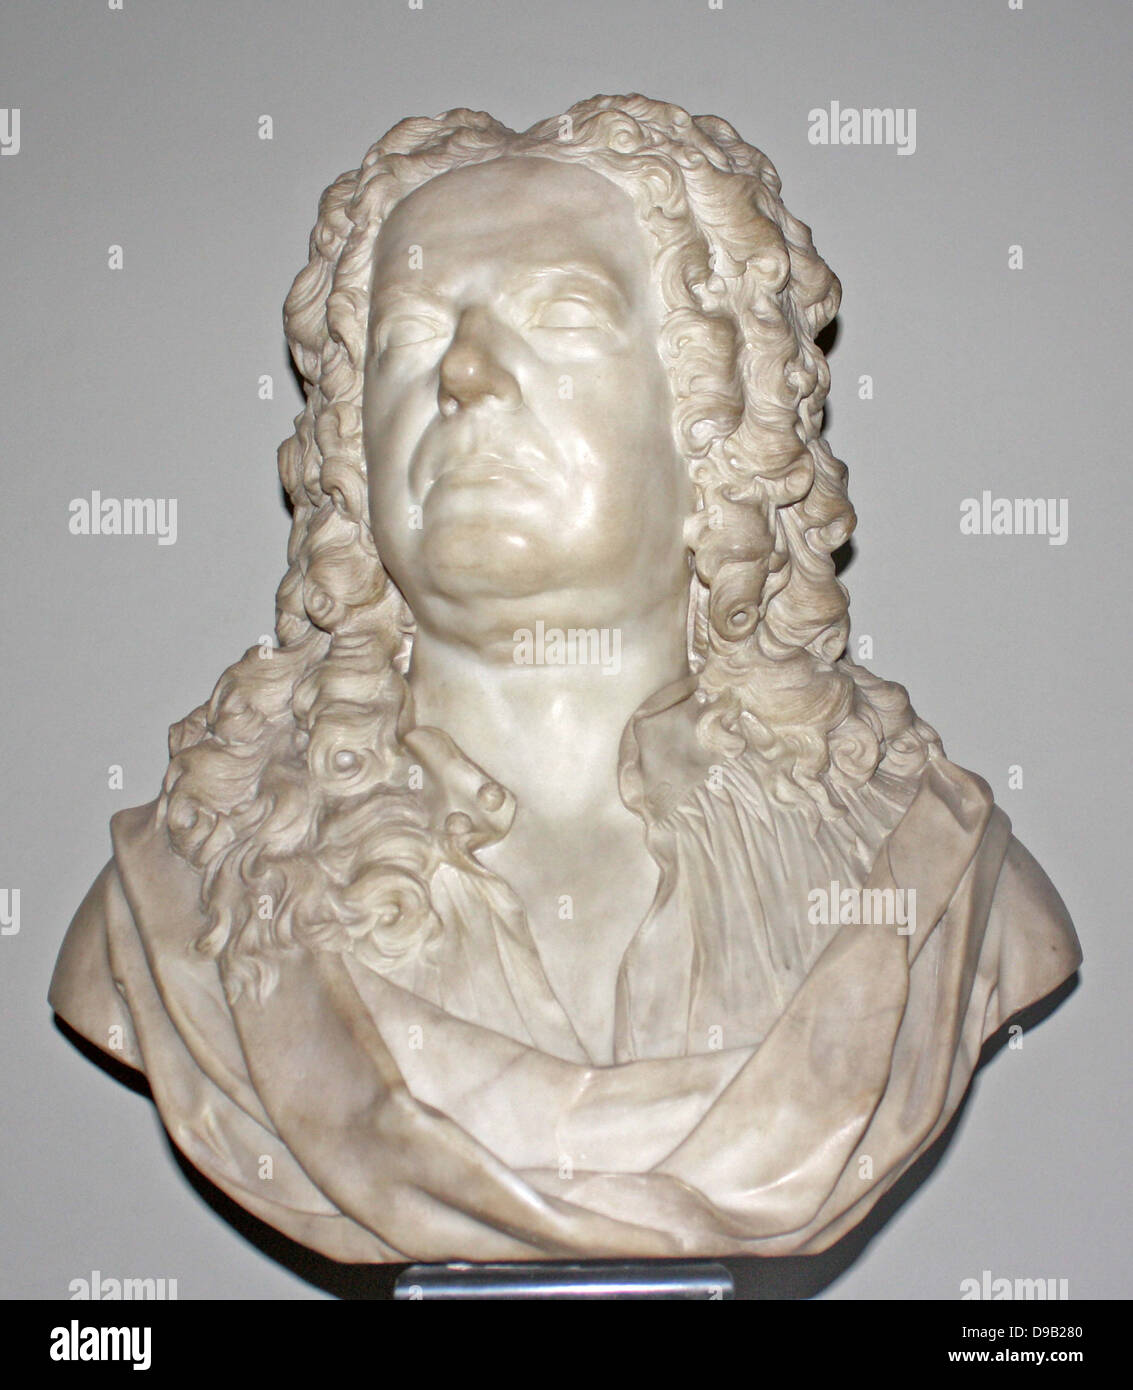 Marble bust of James Gibbs, 1726. Gibbs  (1682-1754) was one of the most influential architects of the first half of the 18th century with the church of St. Martin-in-the-fields (London) being  one of his best-known works.  His Book of Architects published in 1728 became a standard textbook, spreading his personal version of the Palladian Style as far as India and N. America. Stock Photo